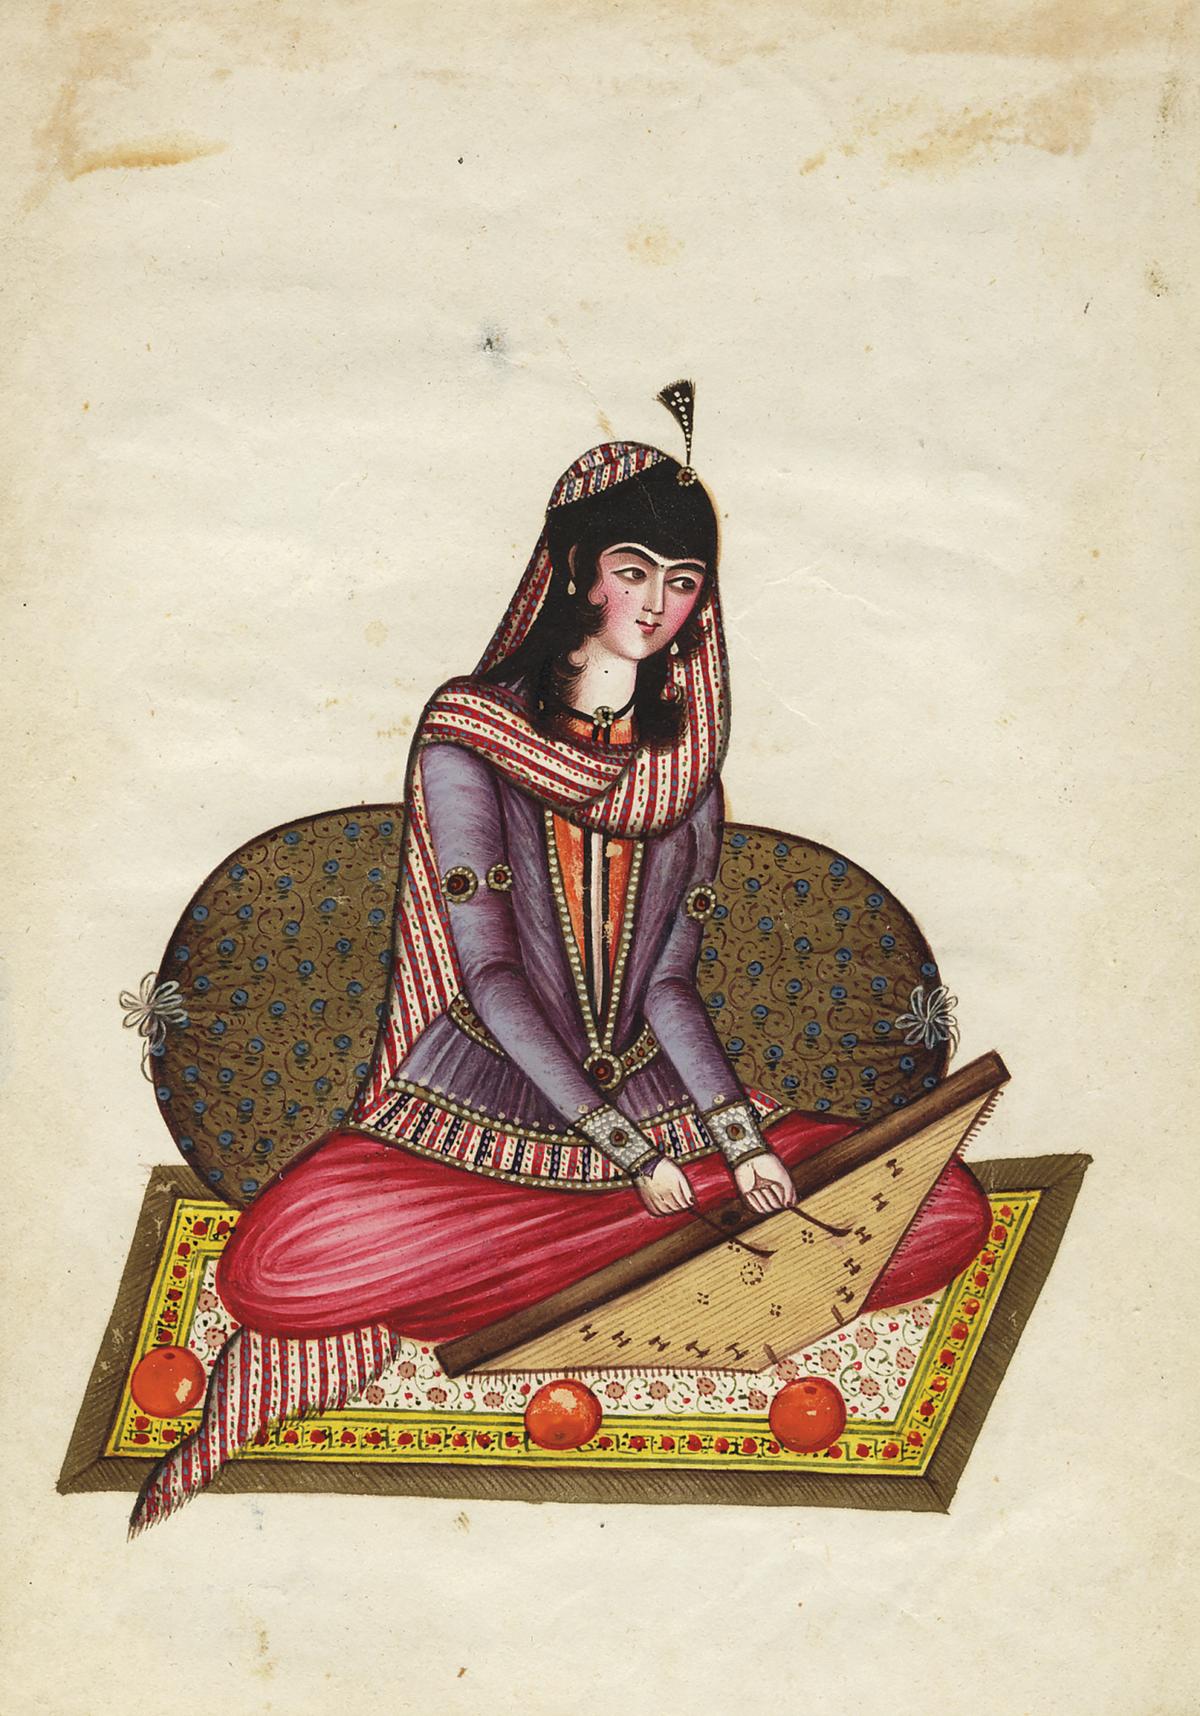 A Persian painting of a woman playing the santir from the Qajar Empire (1785–1925). (<a href="https://commons.wikimedia.org/wiki/File:Qajar_Miniature_(1800_-_1850)_Georgian_State_Museum_of_Theatre,_Music,_Film_and_Choreography_-_Art_Palace_(3).jpg" target="_blank" rel="nofollow noopener">Persian Painters</a>/<a href="https://creativecommons.org/licenses/by-sa/4.0/deed.en" target="_blank" rel="nofollow noopener">CC BY-SA 4.0 DEED</a>)